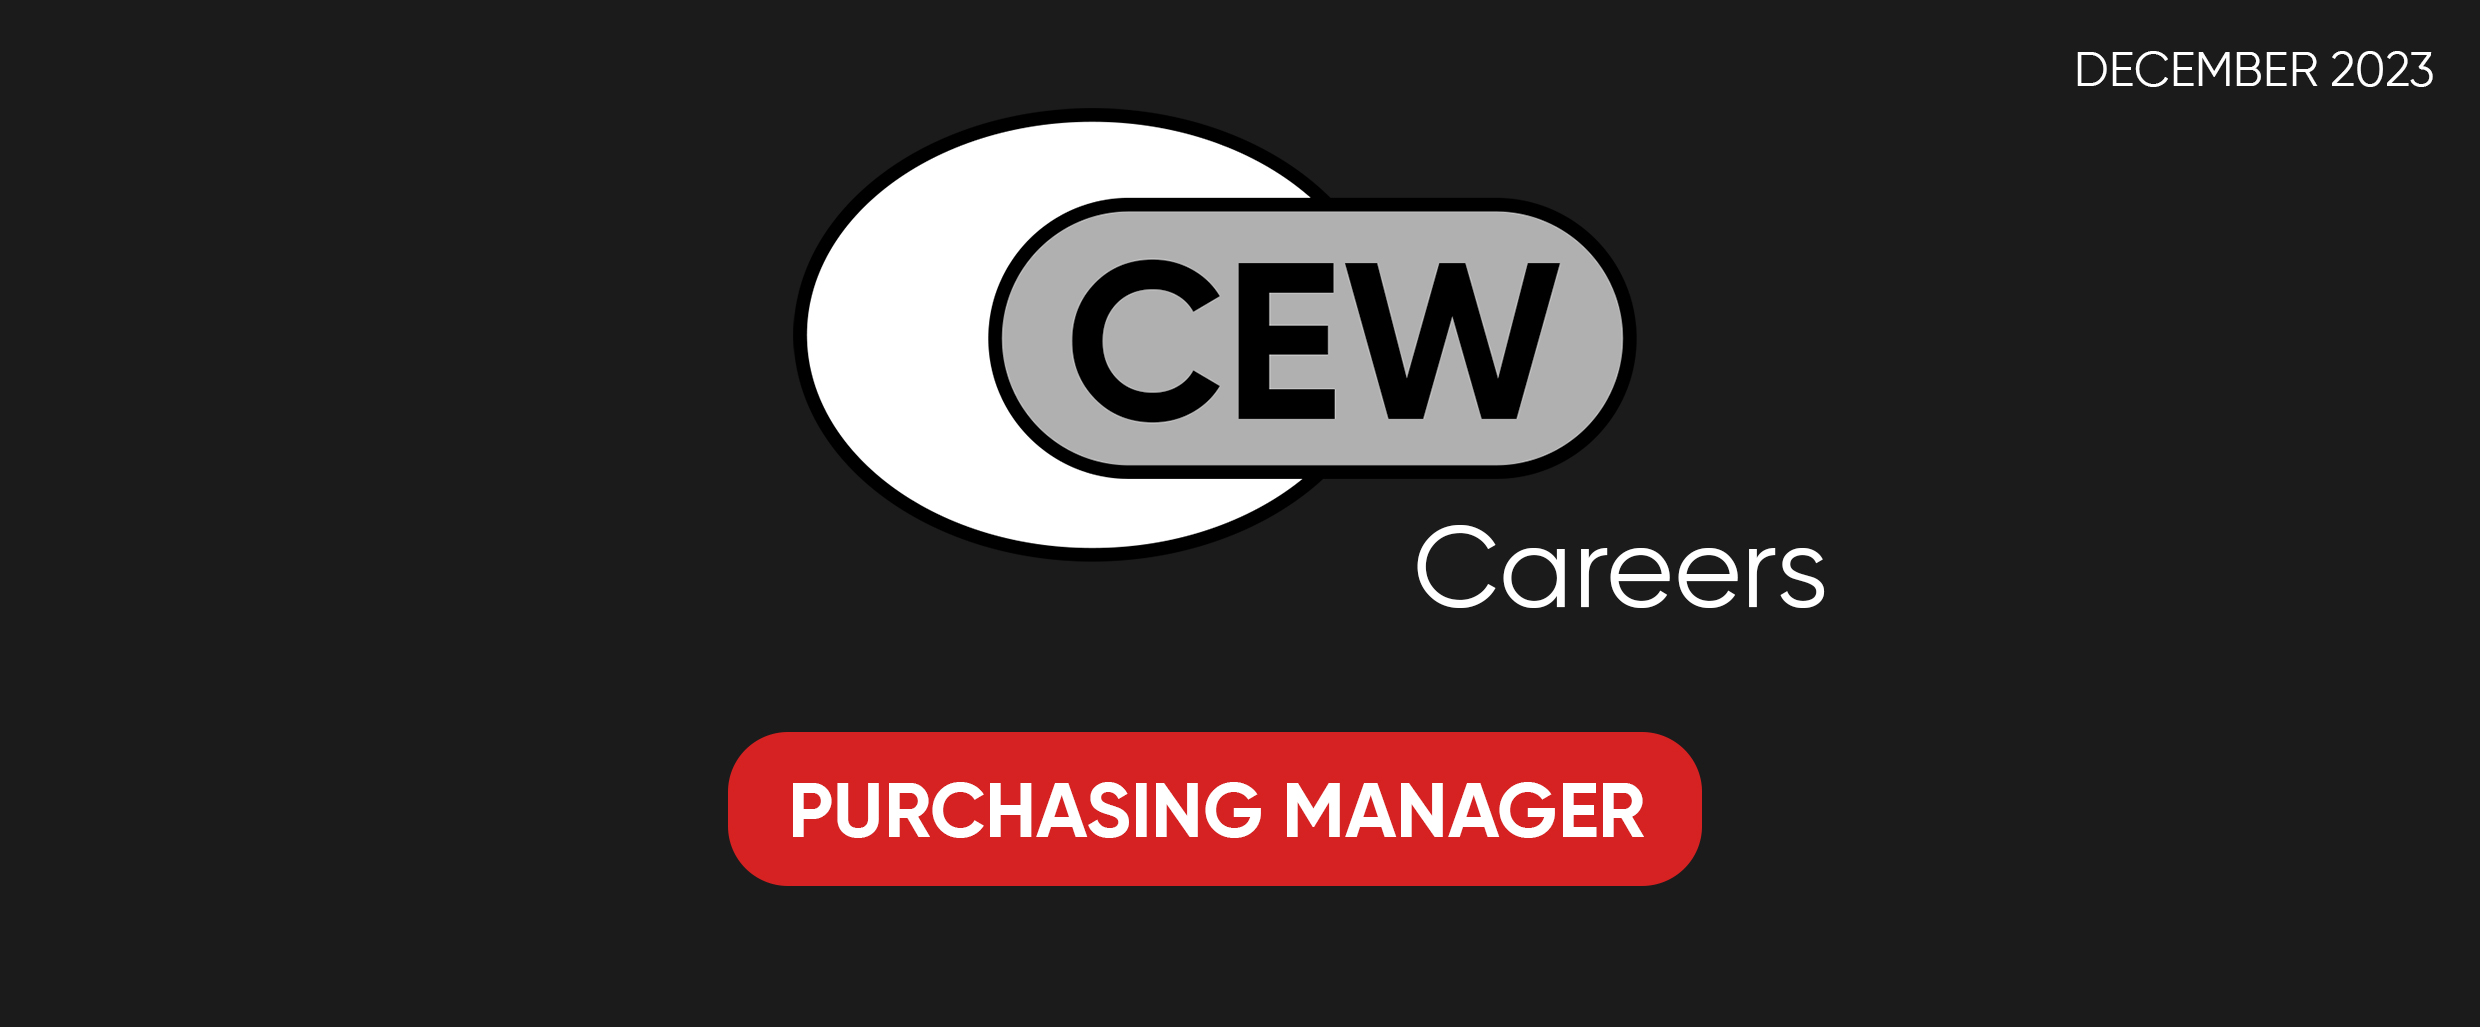 Purchasing Manager Job Vacancy